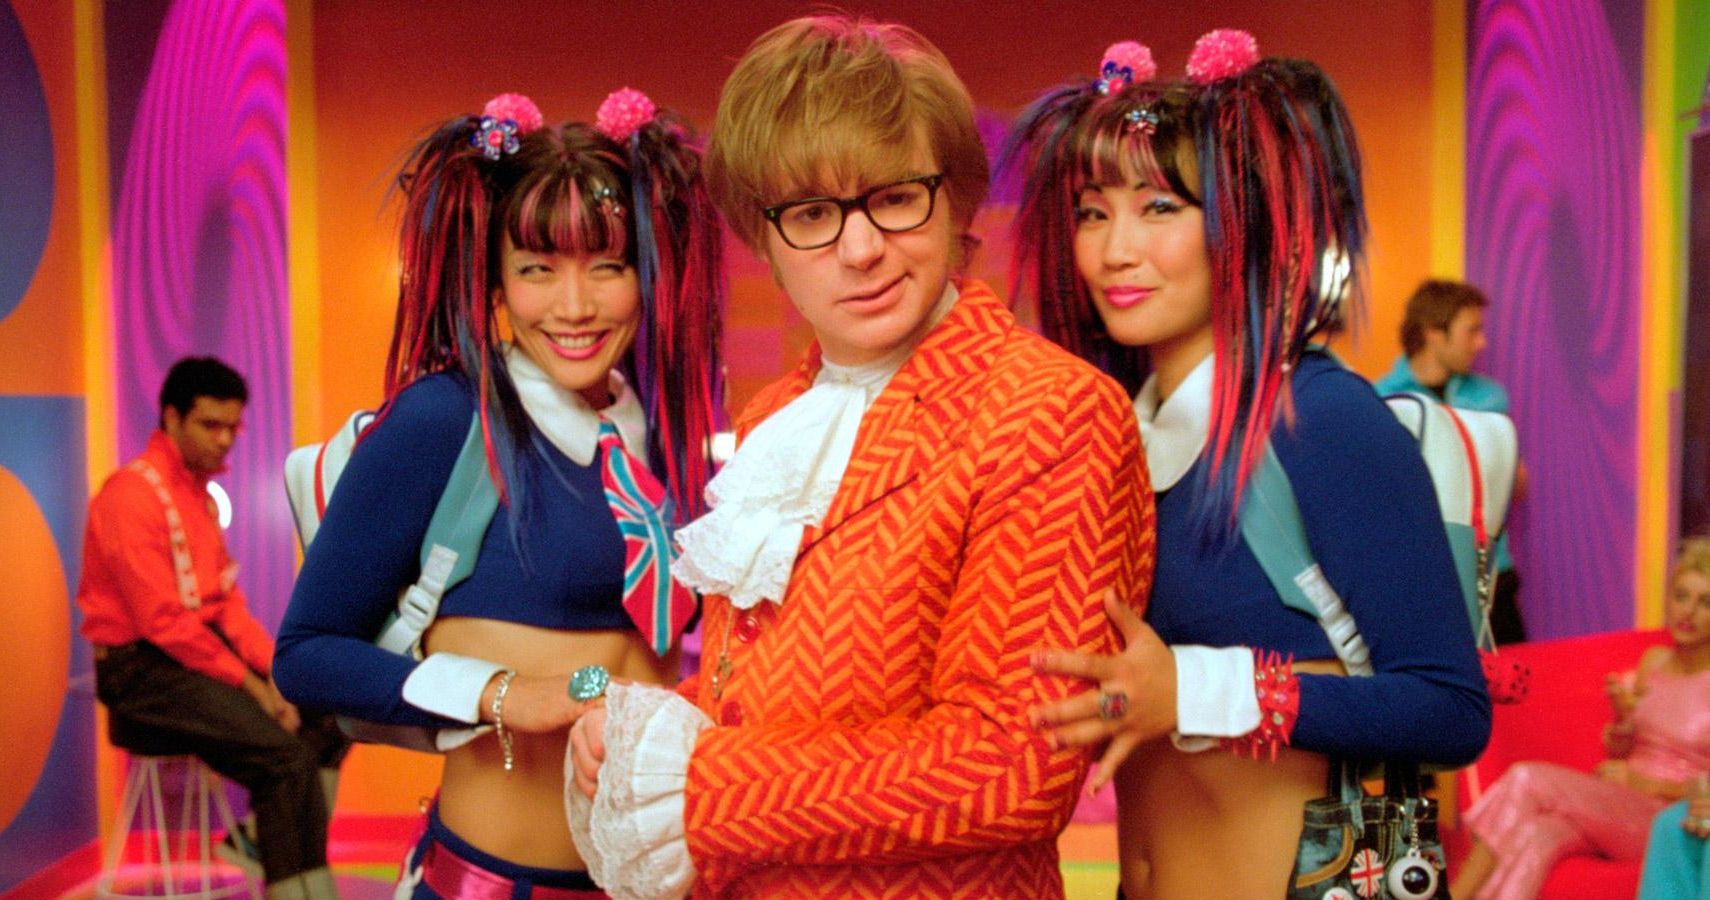 20 facts you might not know about 'Austin Powers: International Man of  Mystery